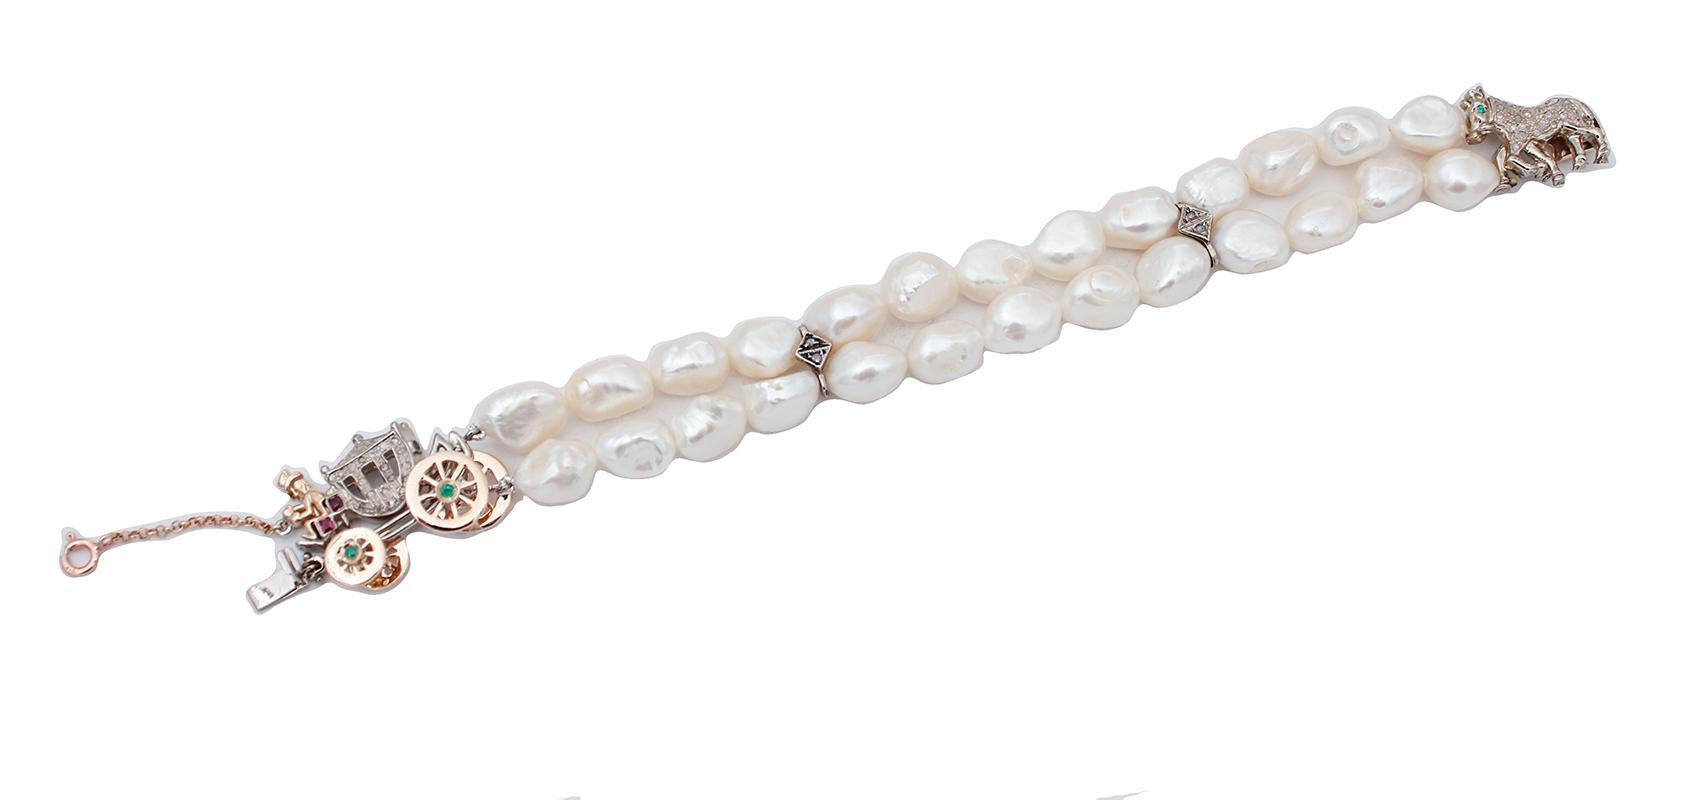 Unique beaded bracelet composed of two pearls rows connected with 4 silver structure studded with diamonds. It has a very special closure in 9K rose gold and silver, that representing a carriage with an horse adorned mounted with diamonds rubies and